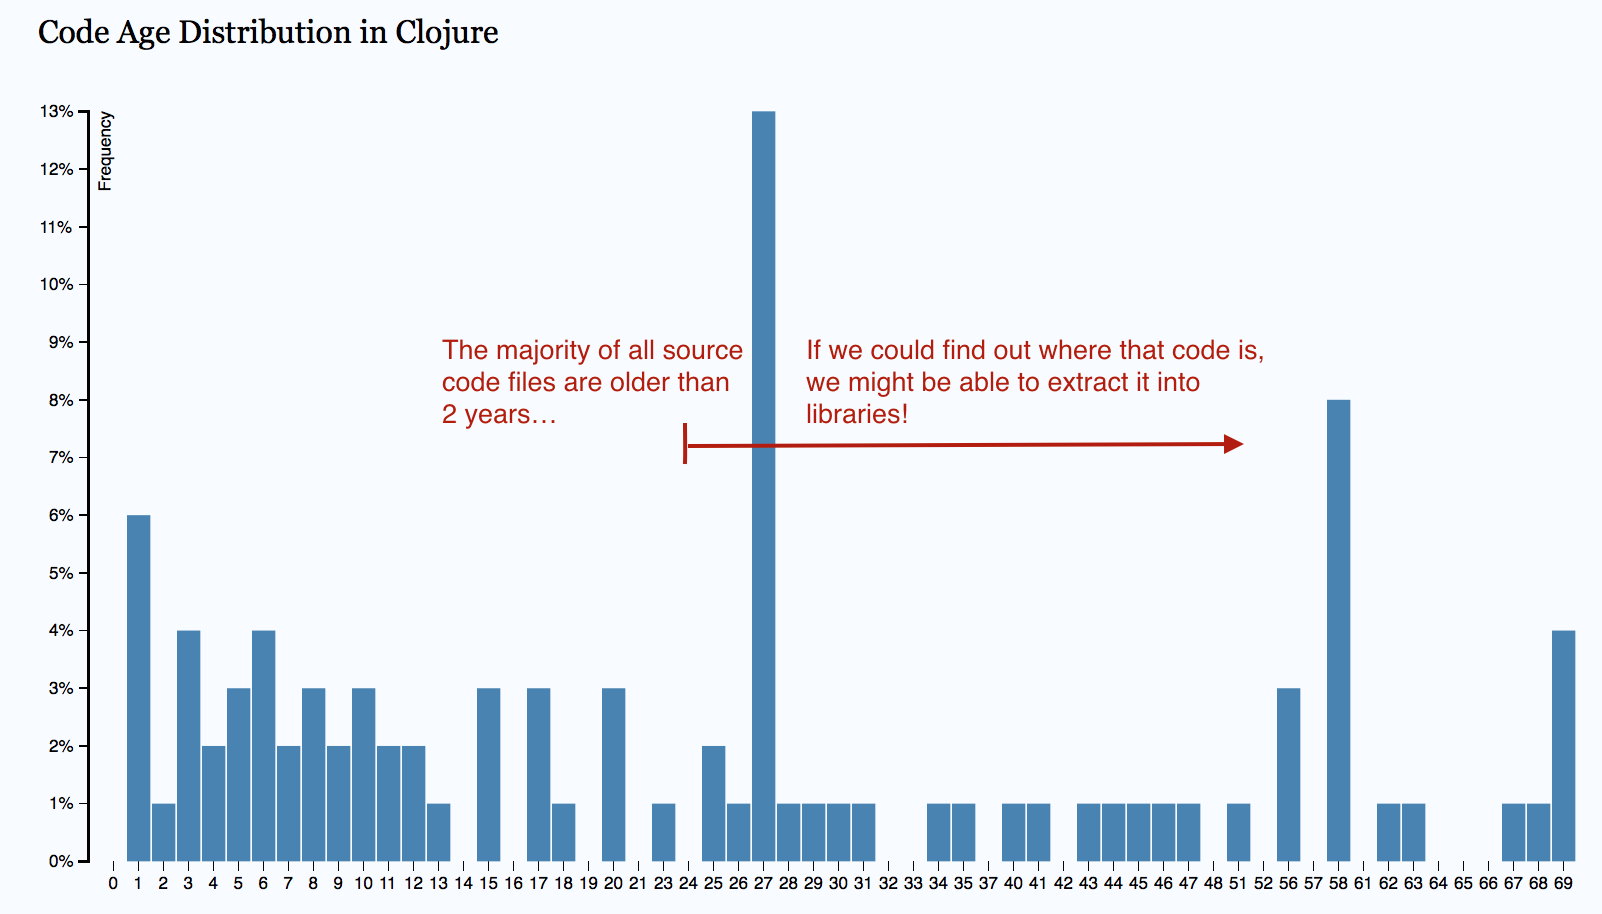 Code age distribution in Clojure